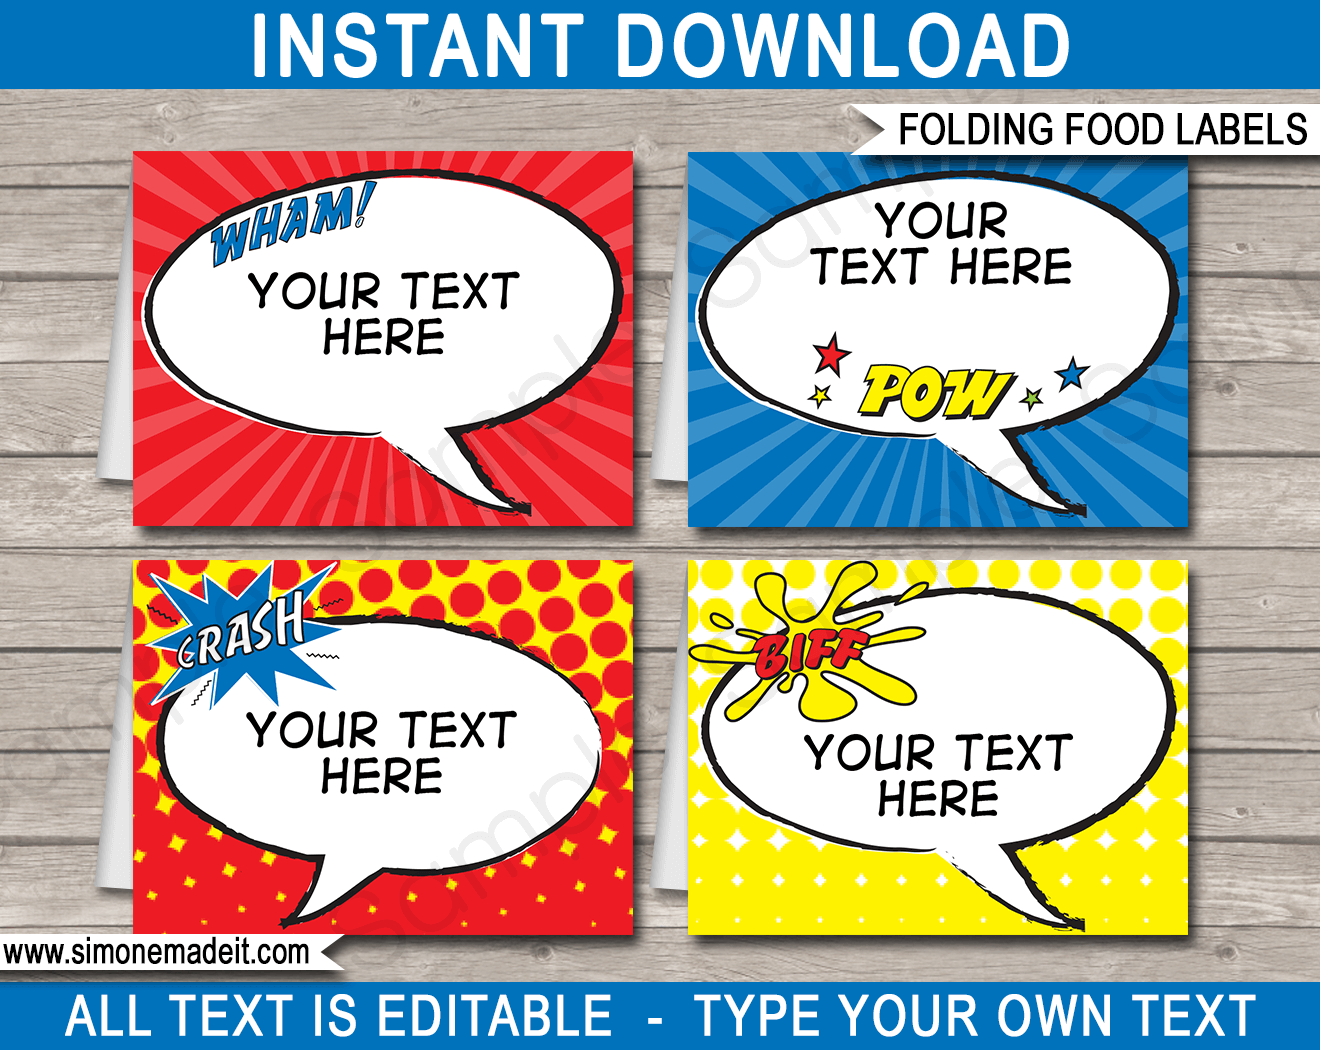 Printable Superhero Party Food Labels Template | Food Buffet Tags | Place Cards | Birthday Party | Editable DIY Template | $3.00 INSTANT DOWNLOAD via SIMONEmadeit.com